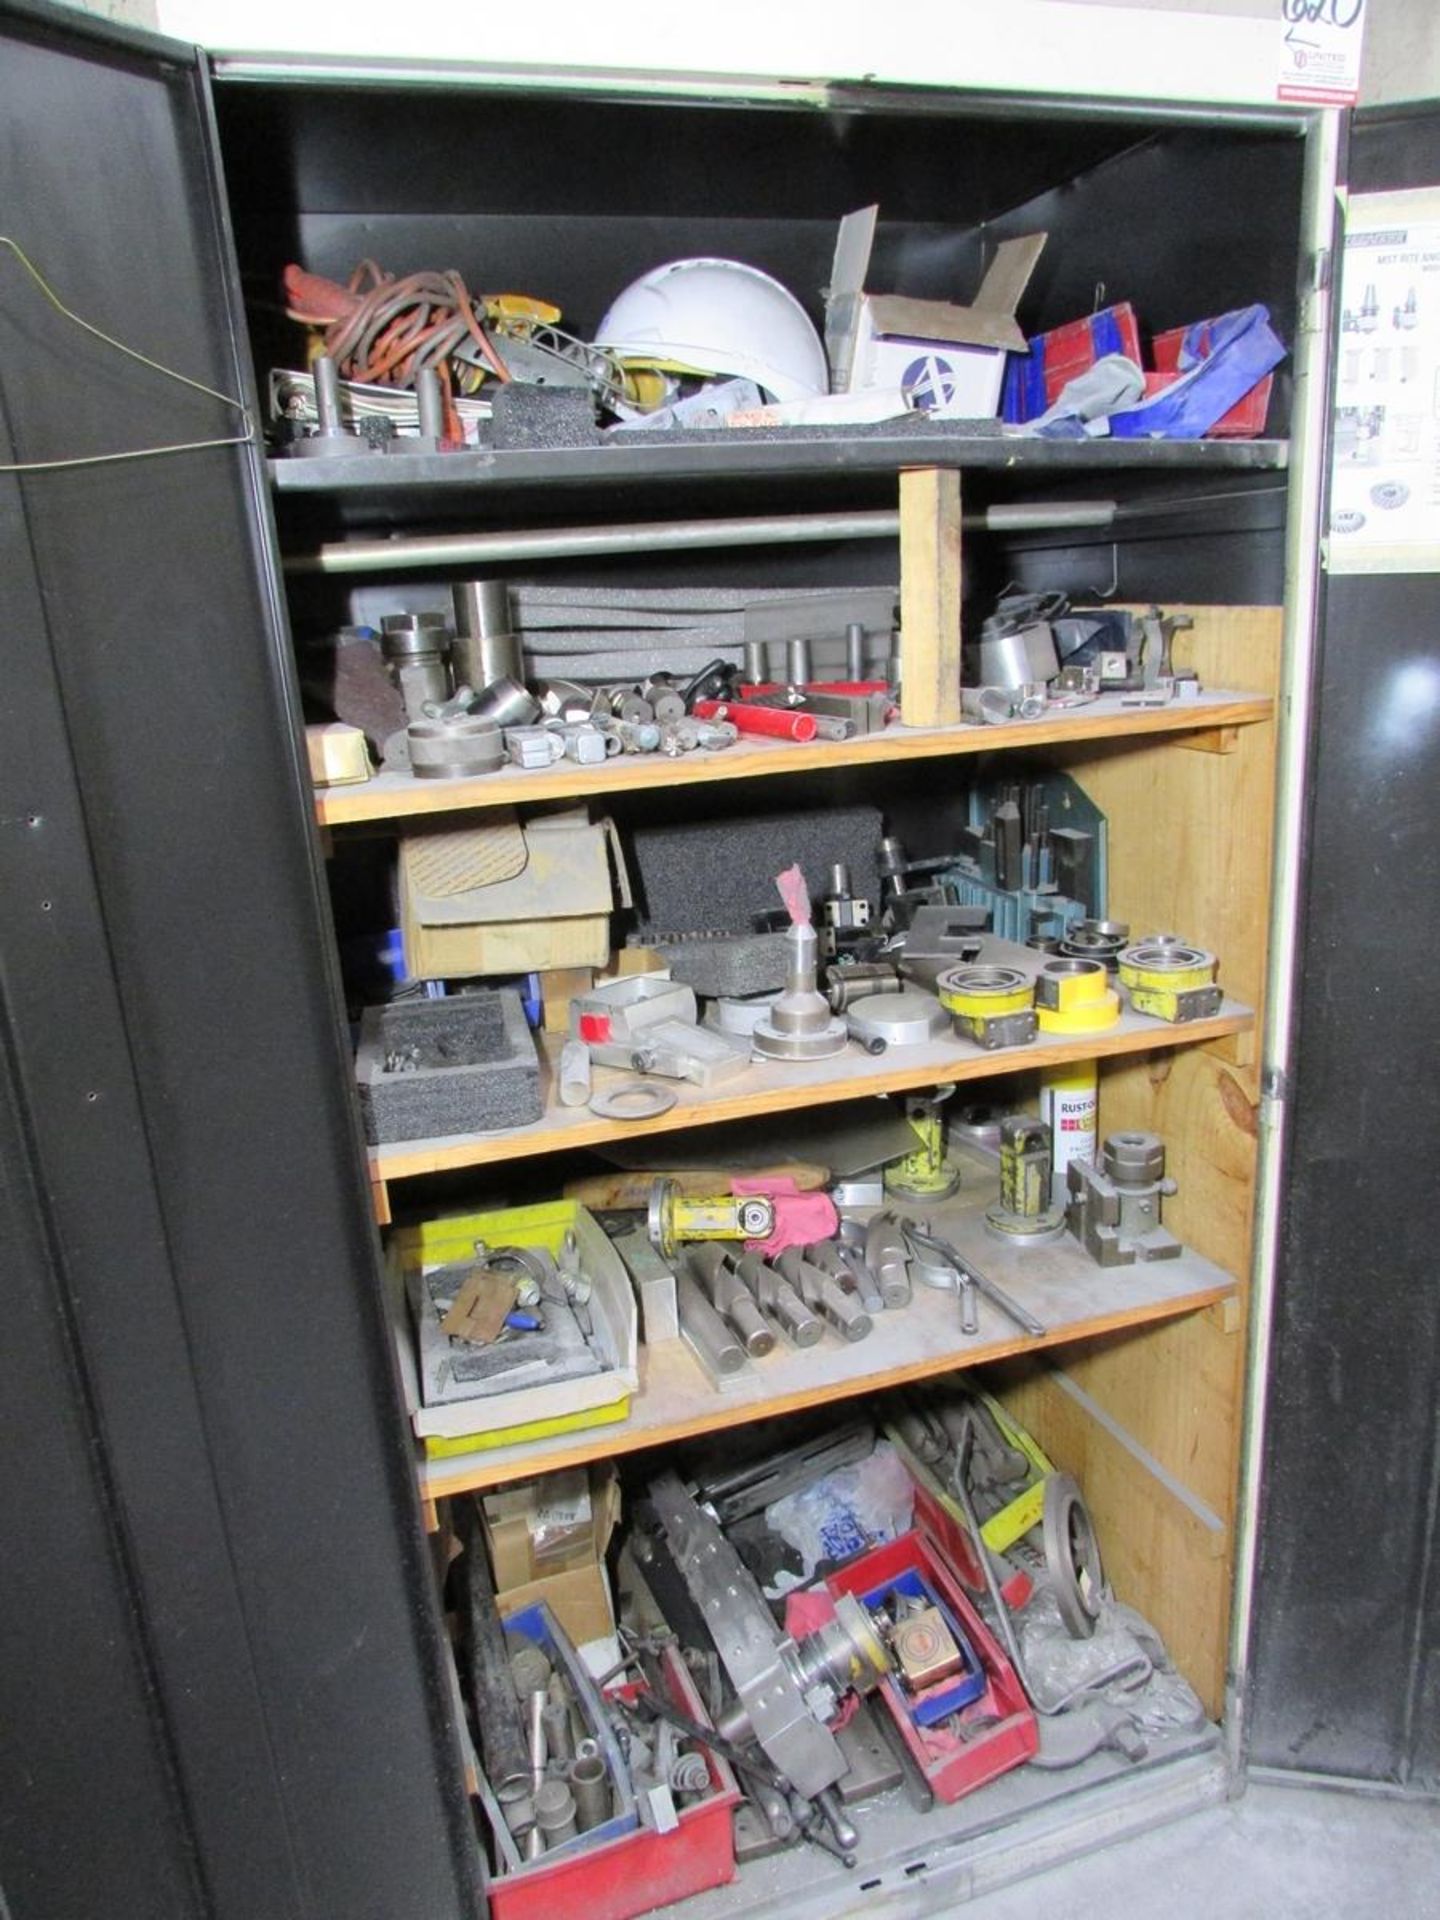 LOT - (3) 2-DOOR CABINETS AND (1) SHELVING UNIT, W/ CONTENTS: ASSORTED TOOLING, HARDWARE - Image 2 of 11